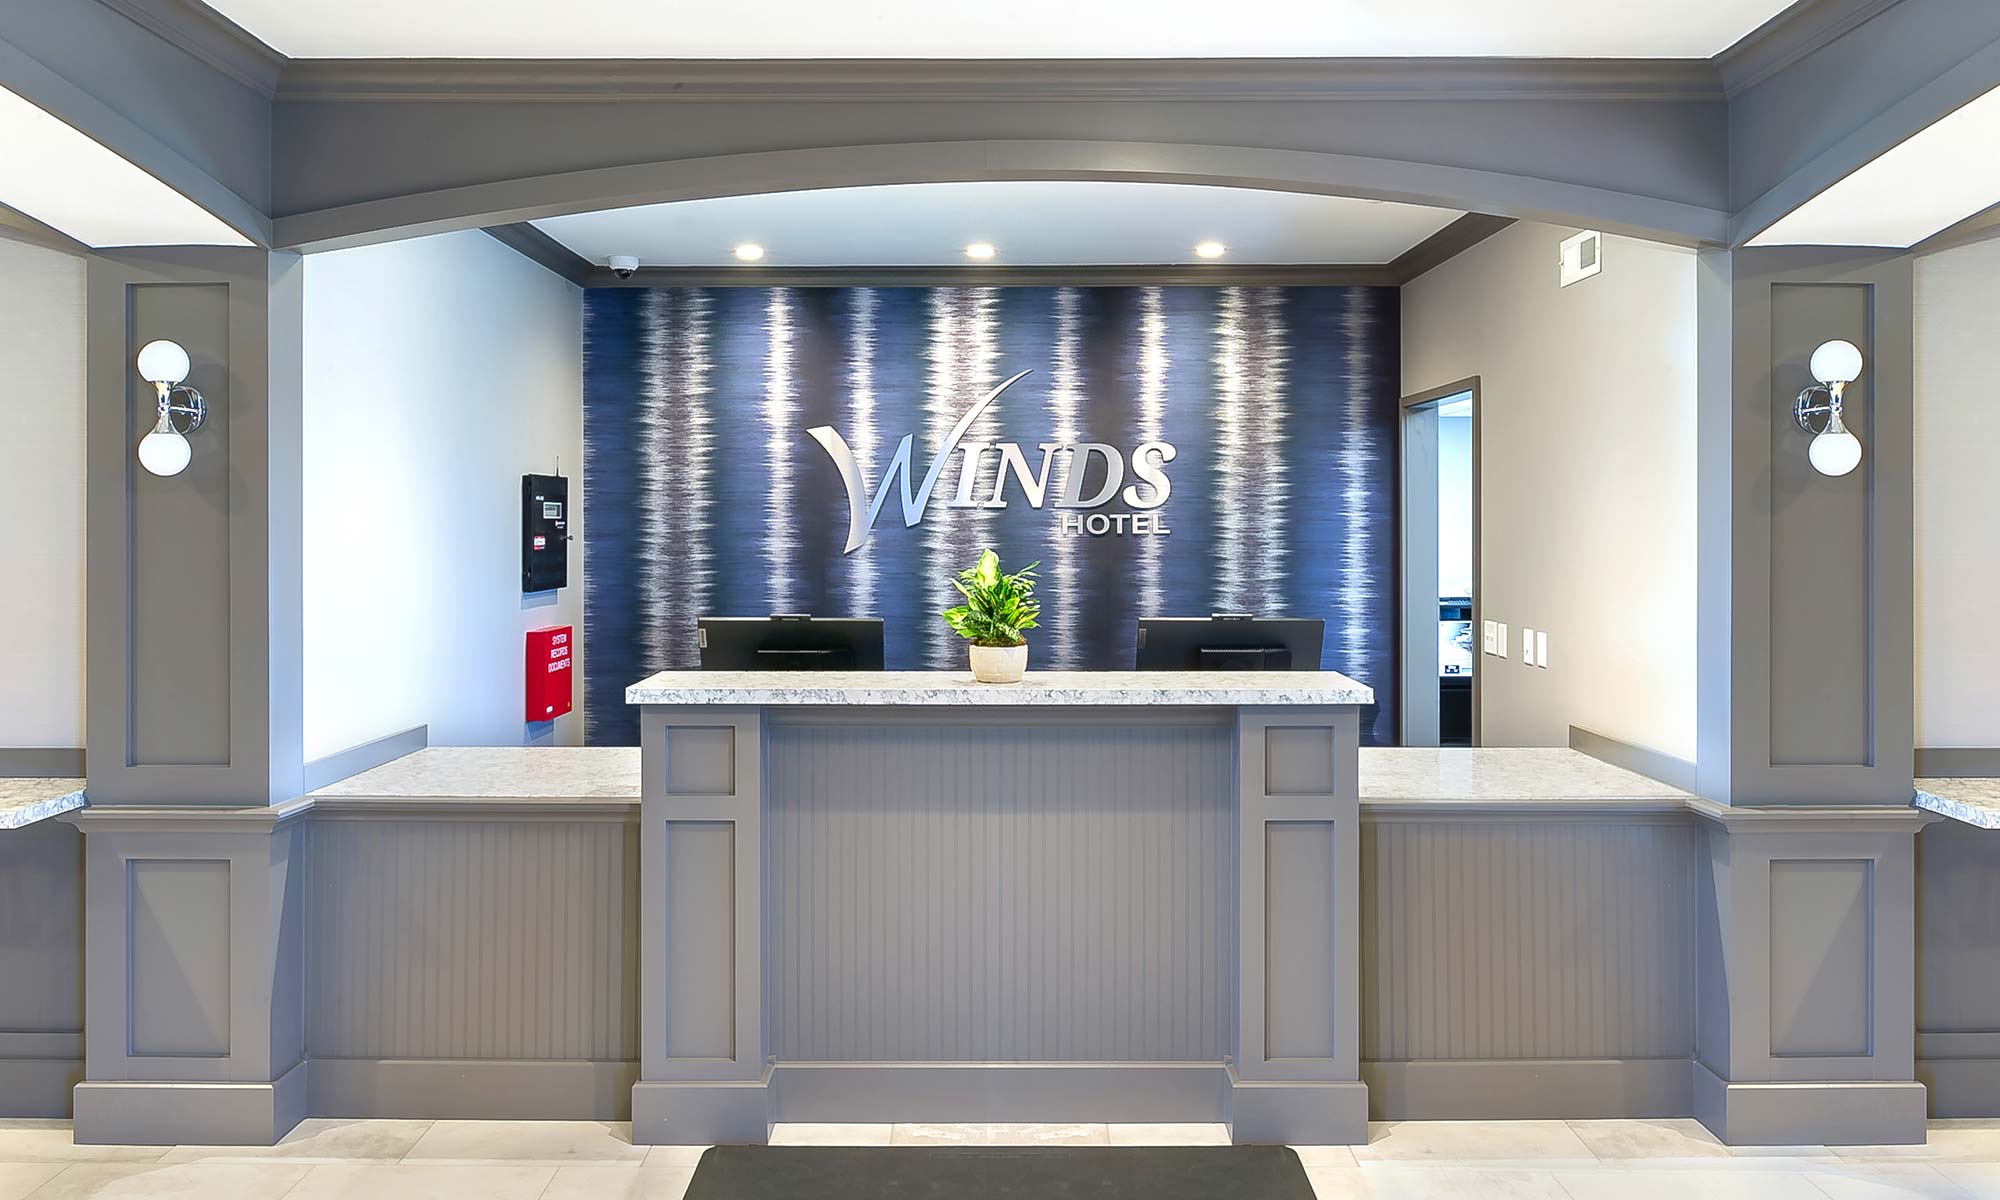 Photo of the WINDS Hotel front desk